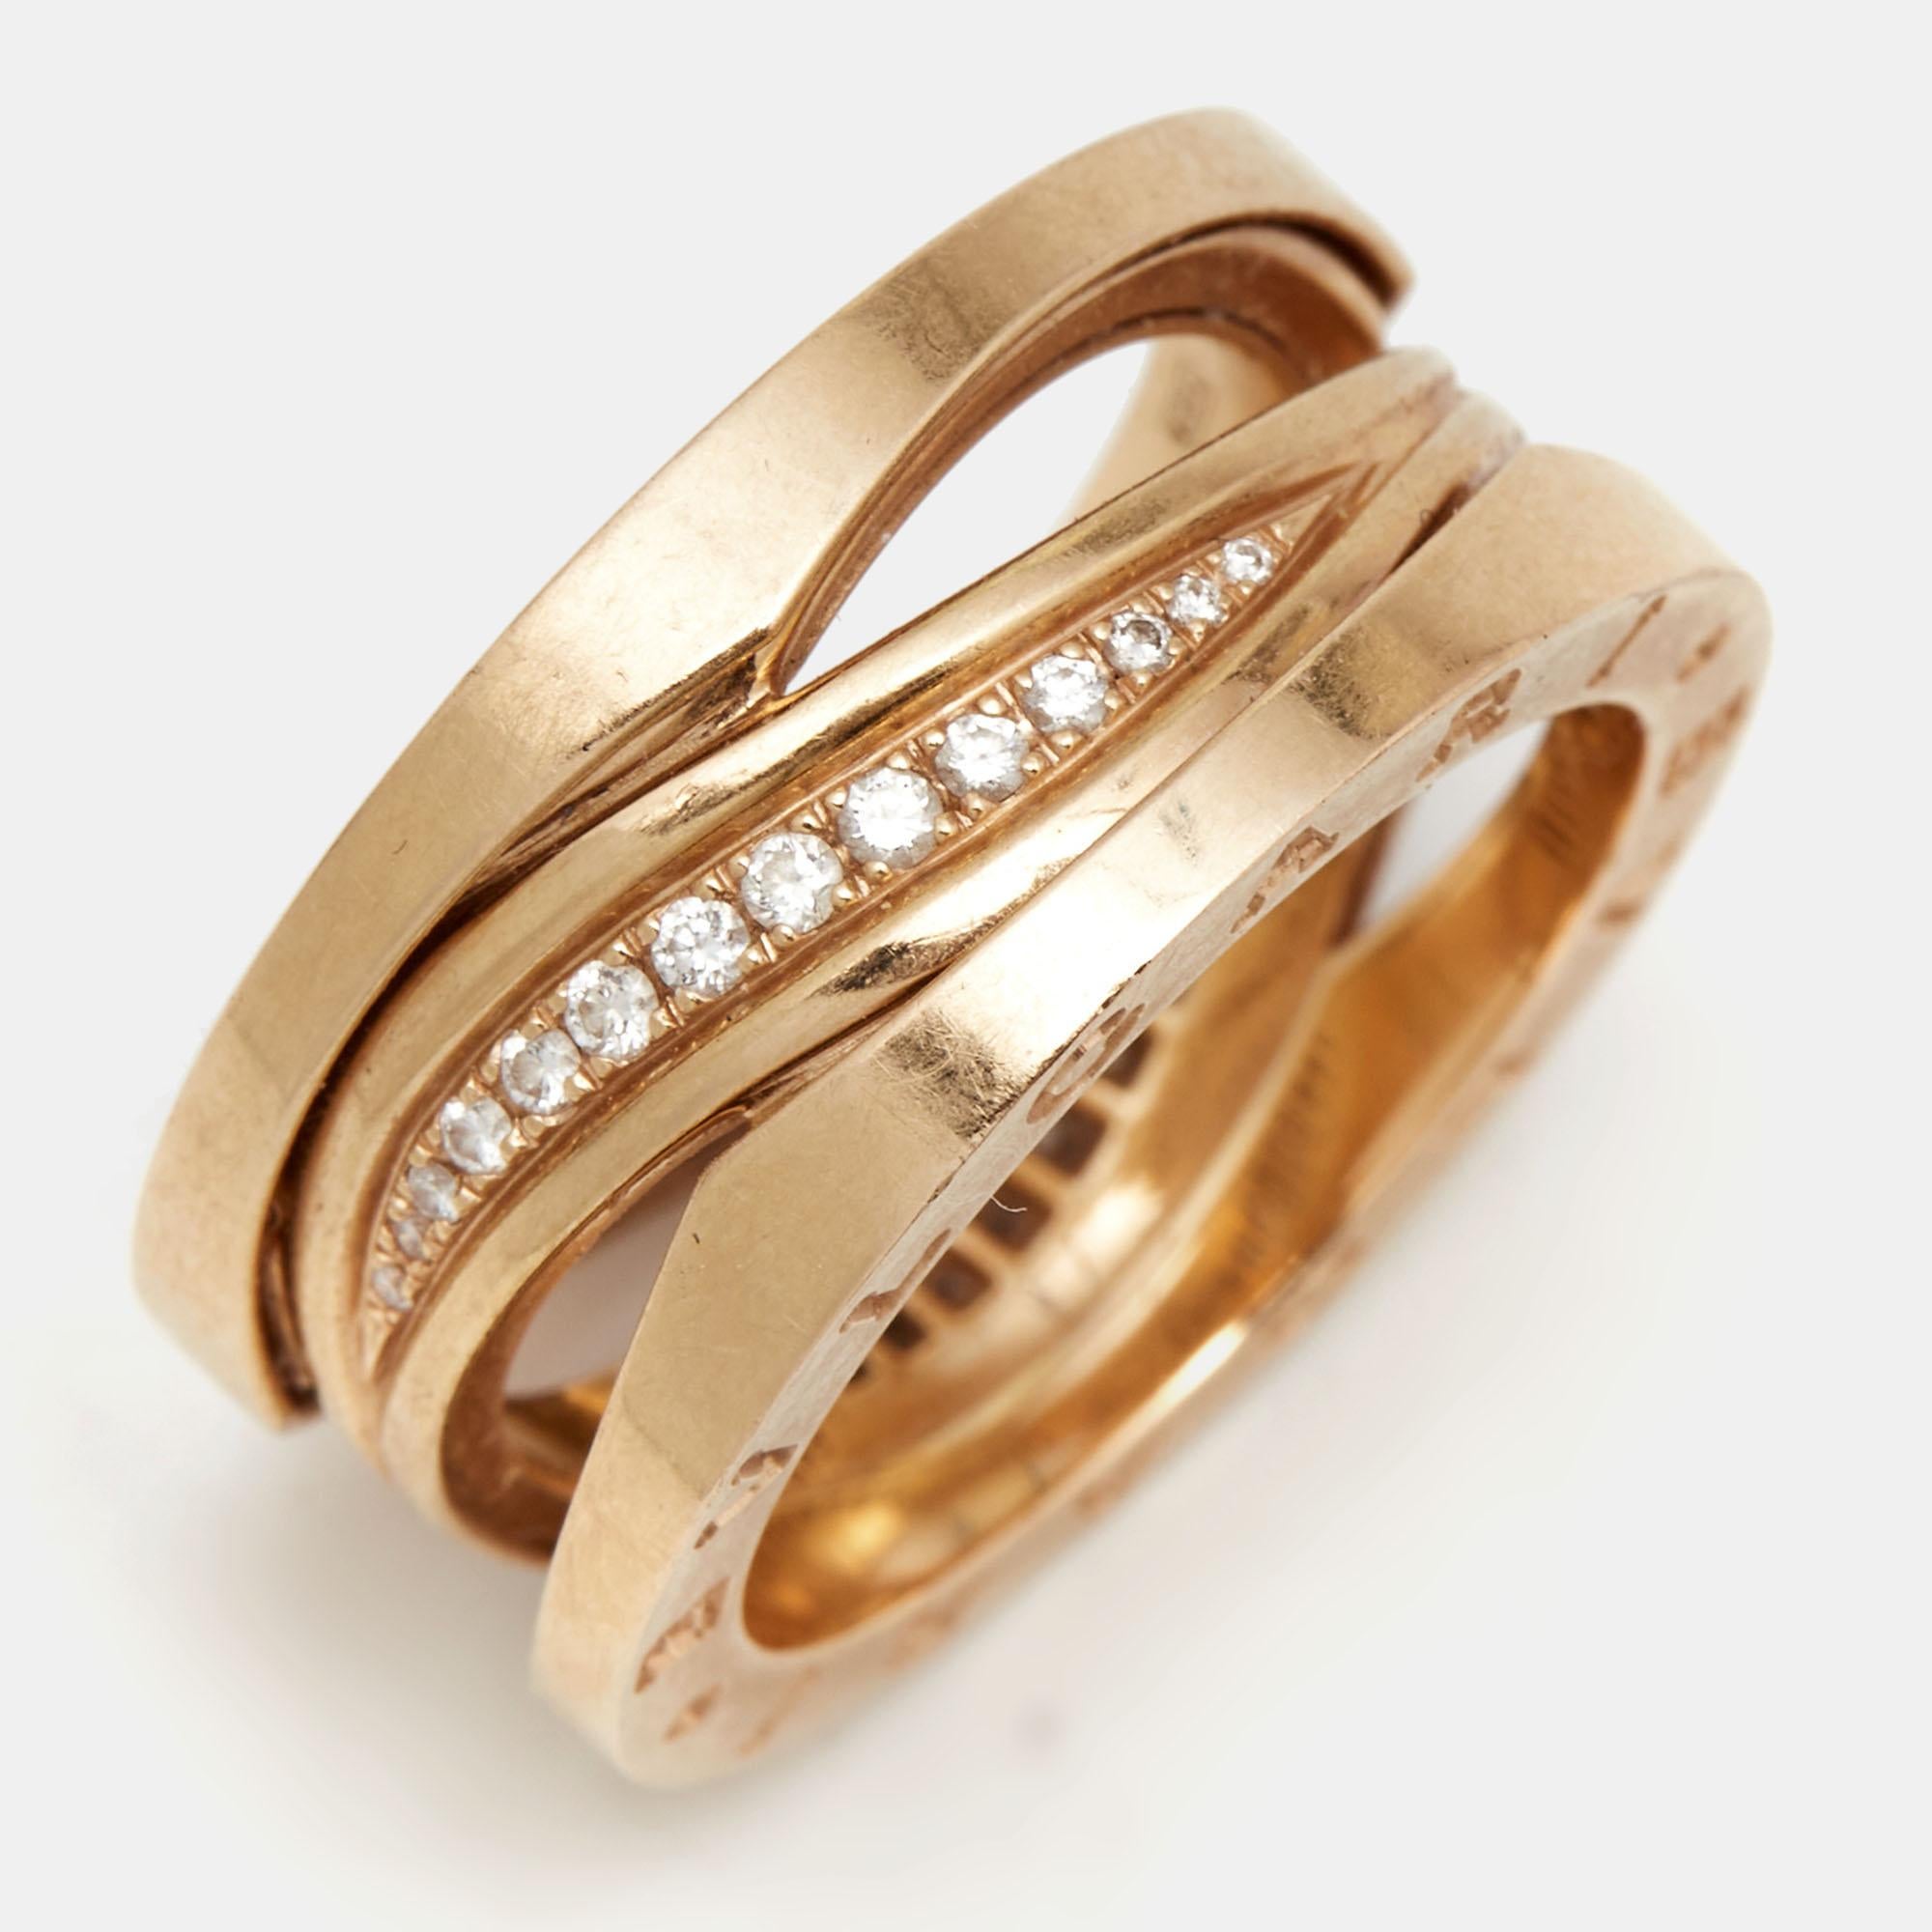 For the woman who has a refined taste in fine jewelry, Bvlgari brings her this immaculately crafted ring that has been made to be praised. The ring has a rather modern style of bands in 18k rose gold, elevated by diamonds. Reinterpreted by Zaha